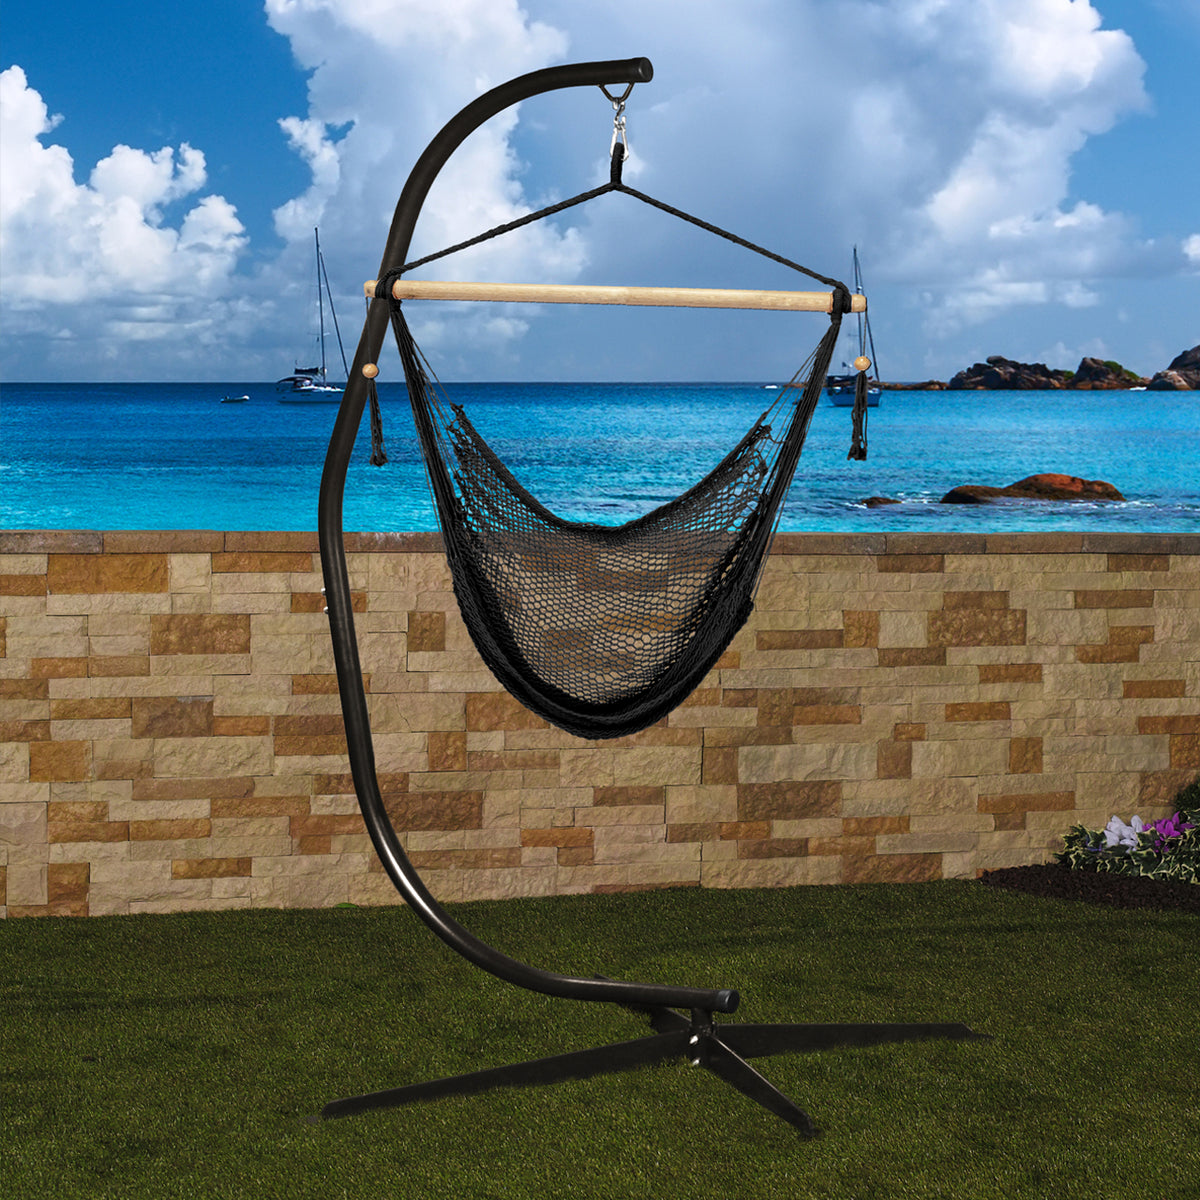 Bliss Hammocks 84-inch Swing Chair Stand with Hanging Hook holding a hammock chair outside with the ocean in the background.